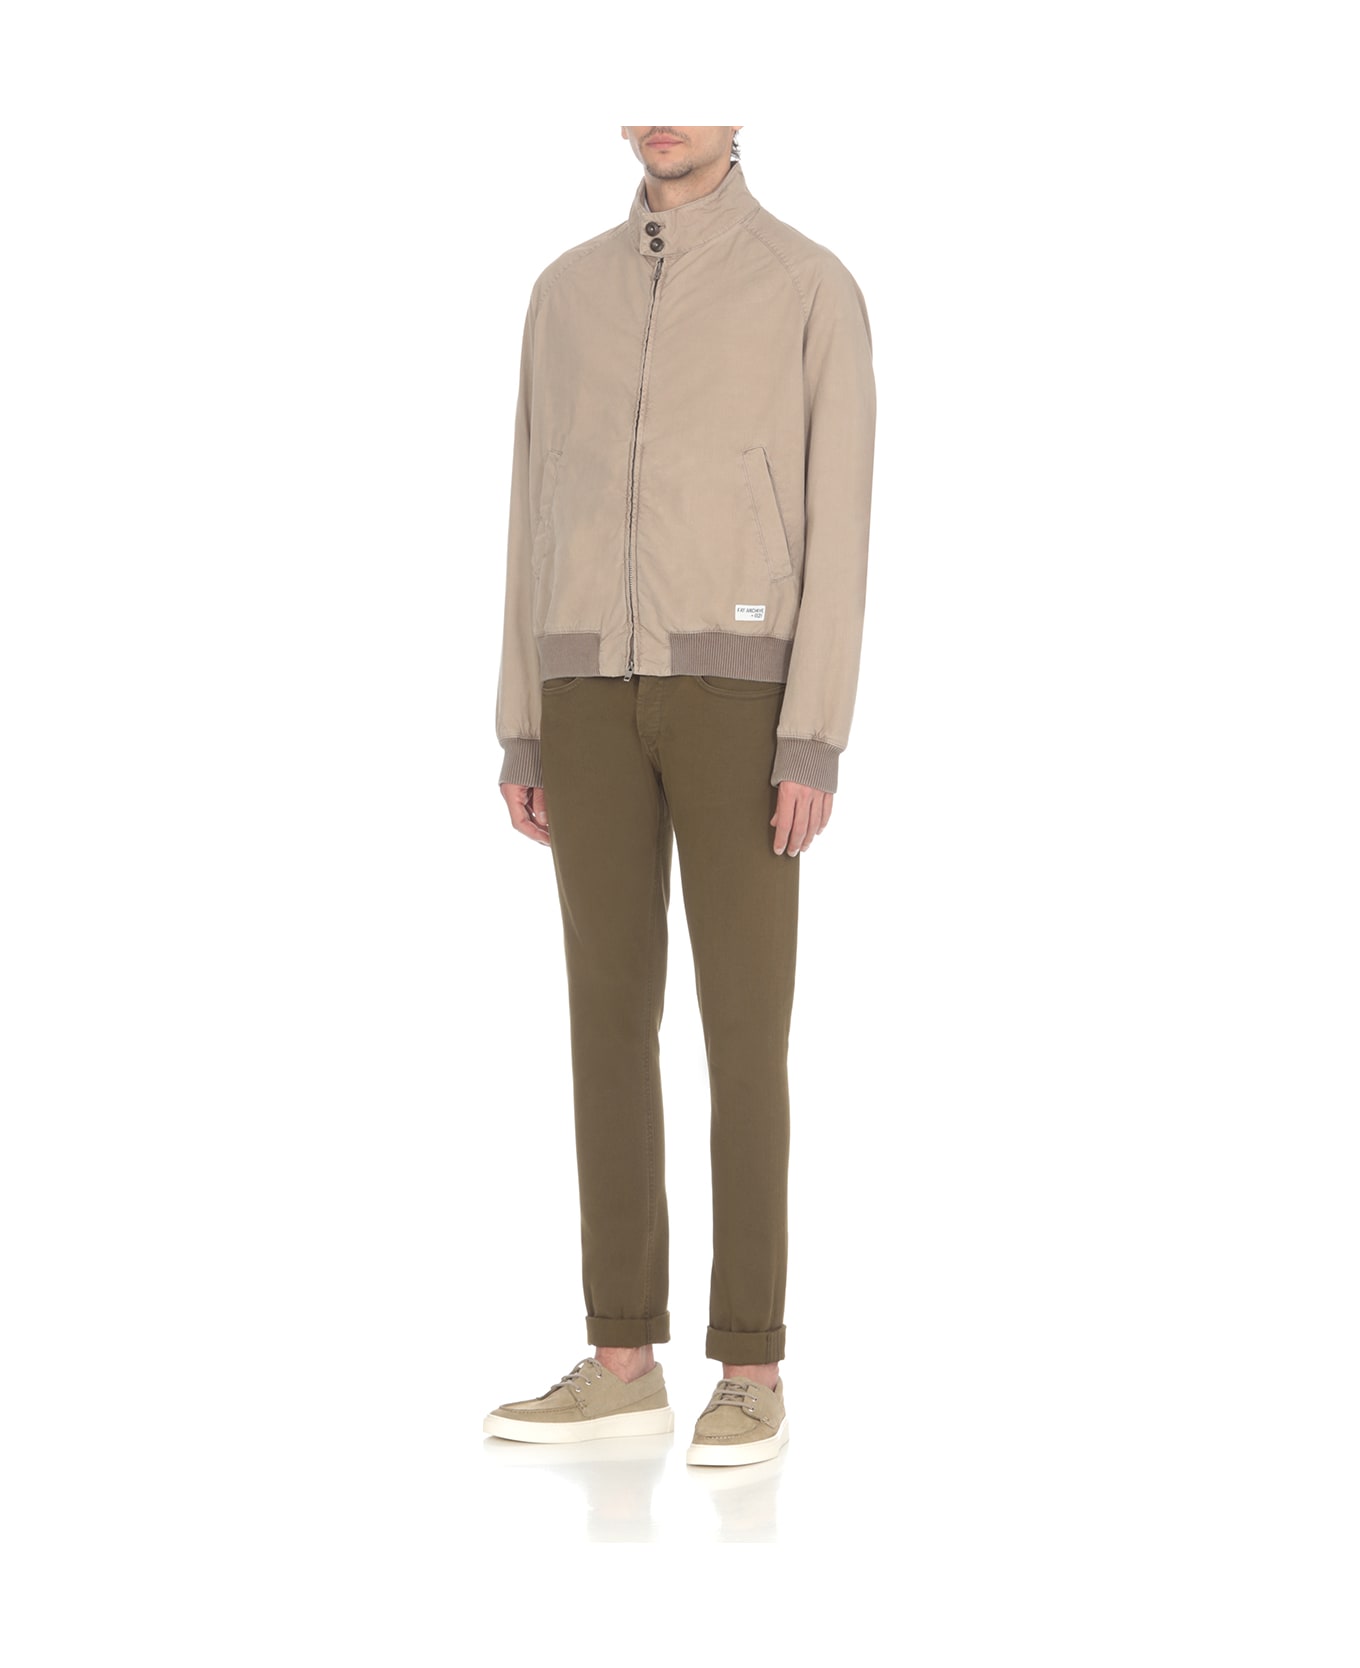 Fay Archive Bomber Jacket - Beige